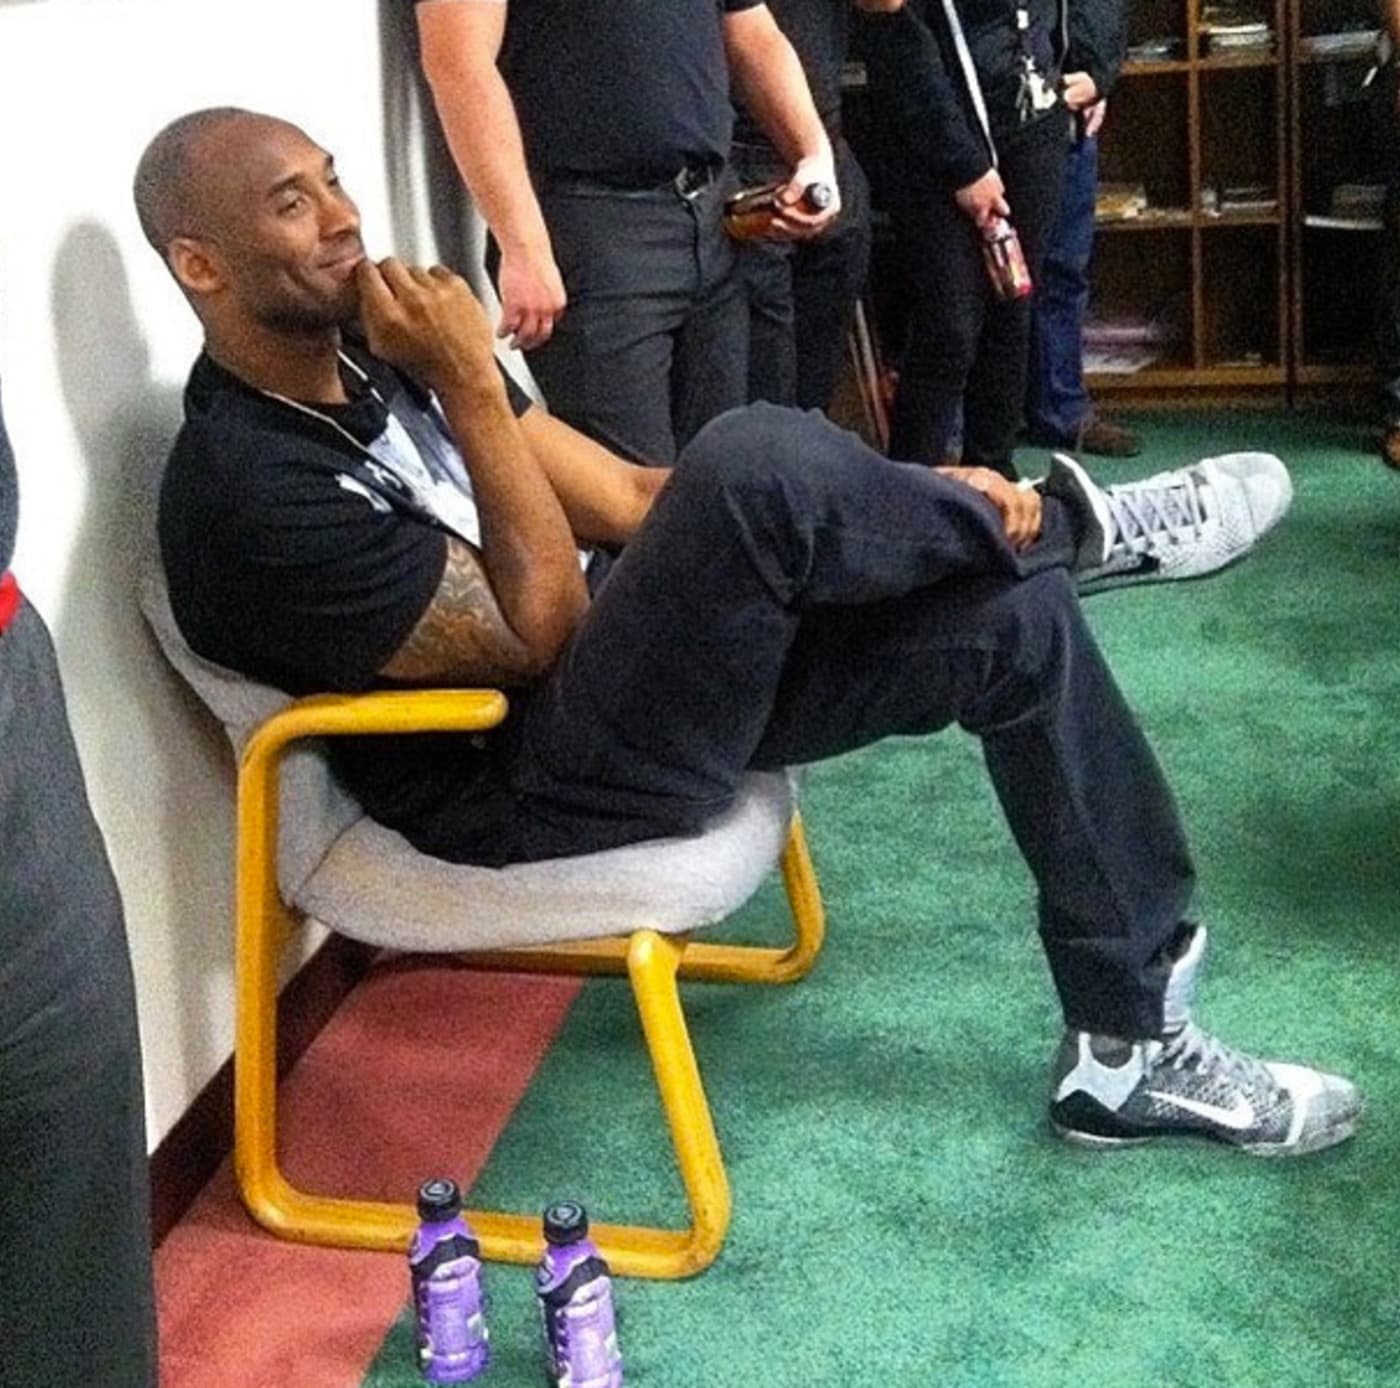 Bryant Chills in the Nike Kobe 9 “Detail” Complex